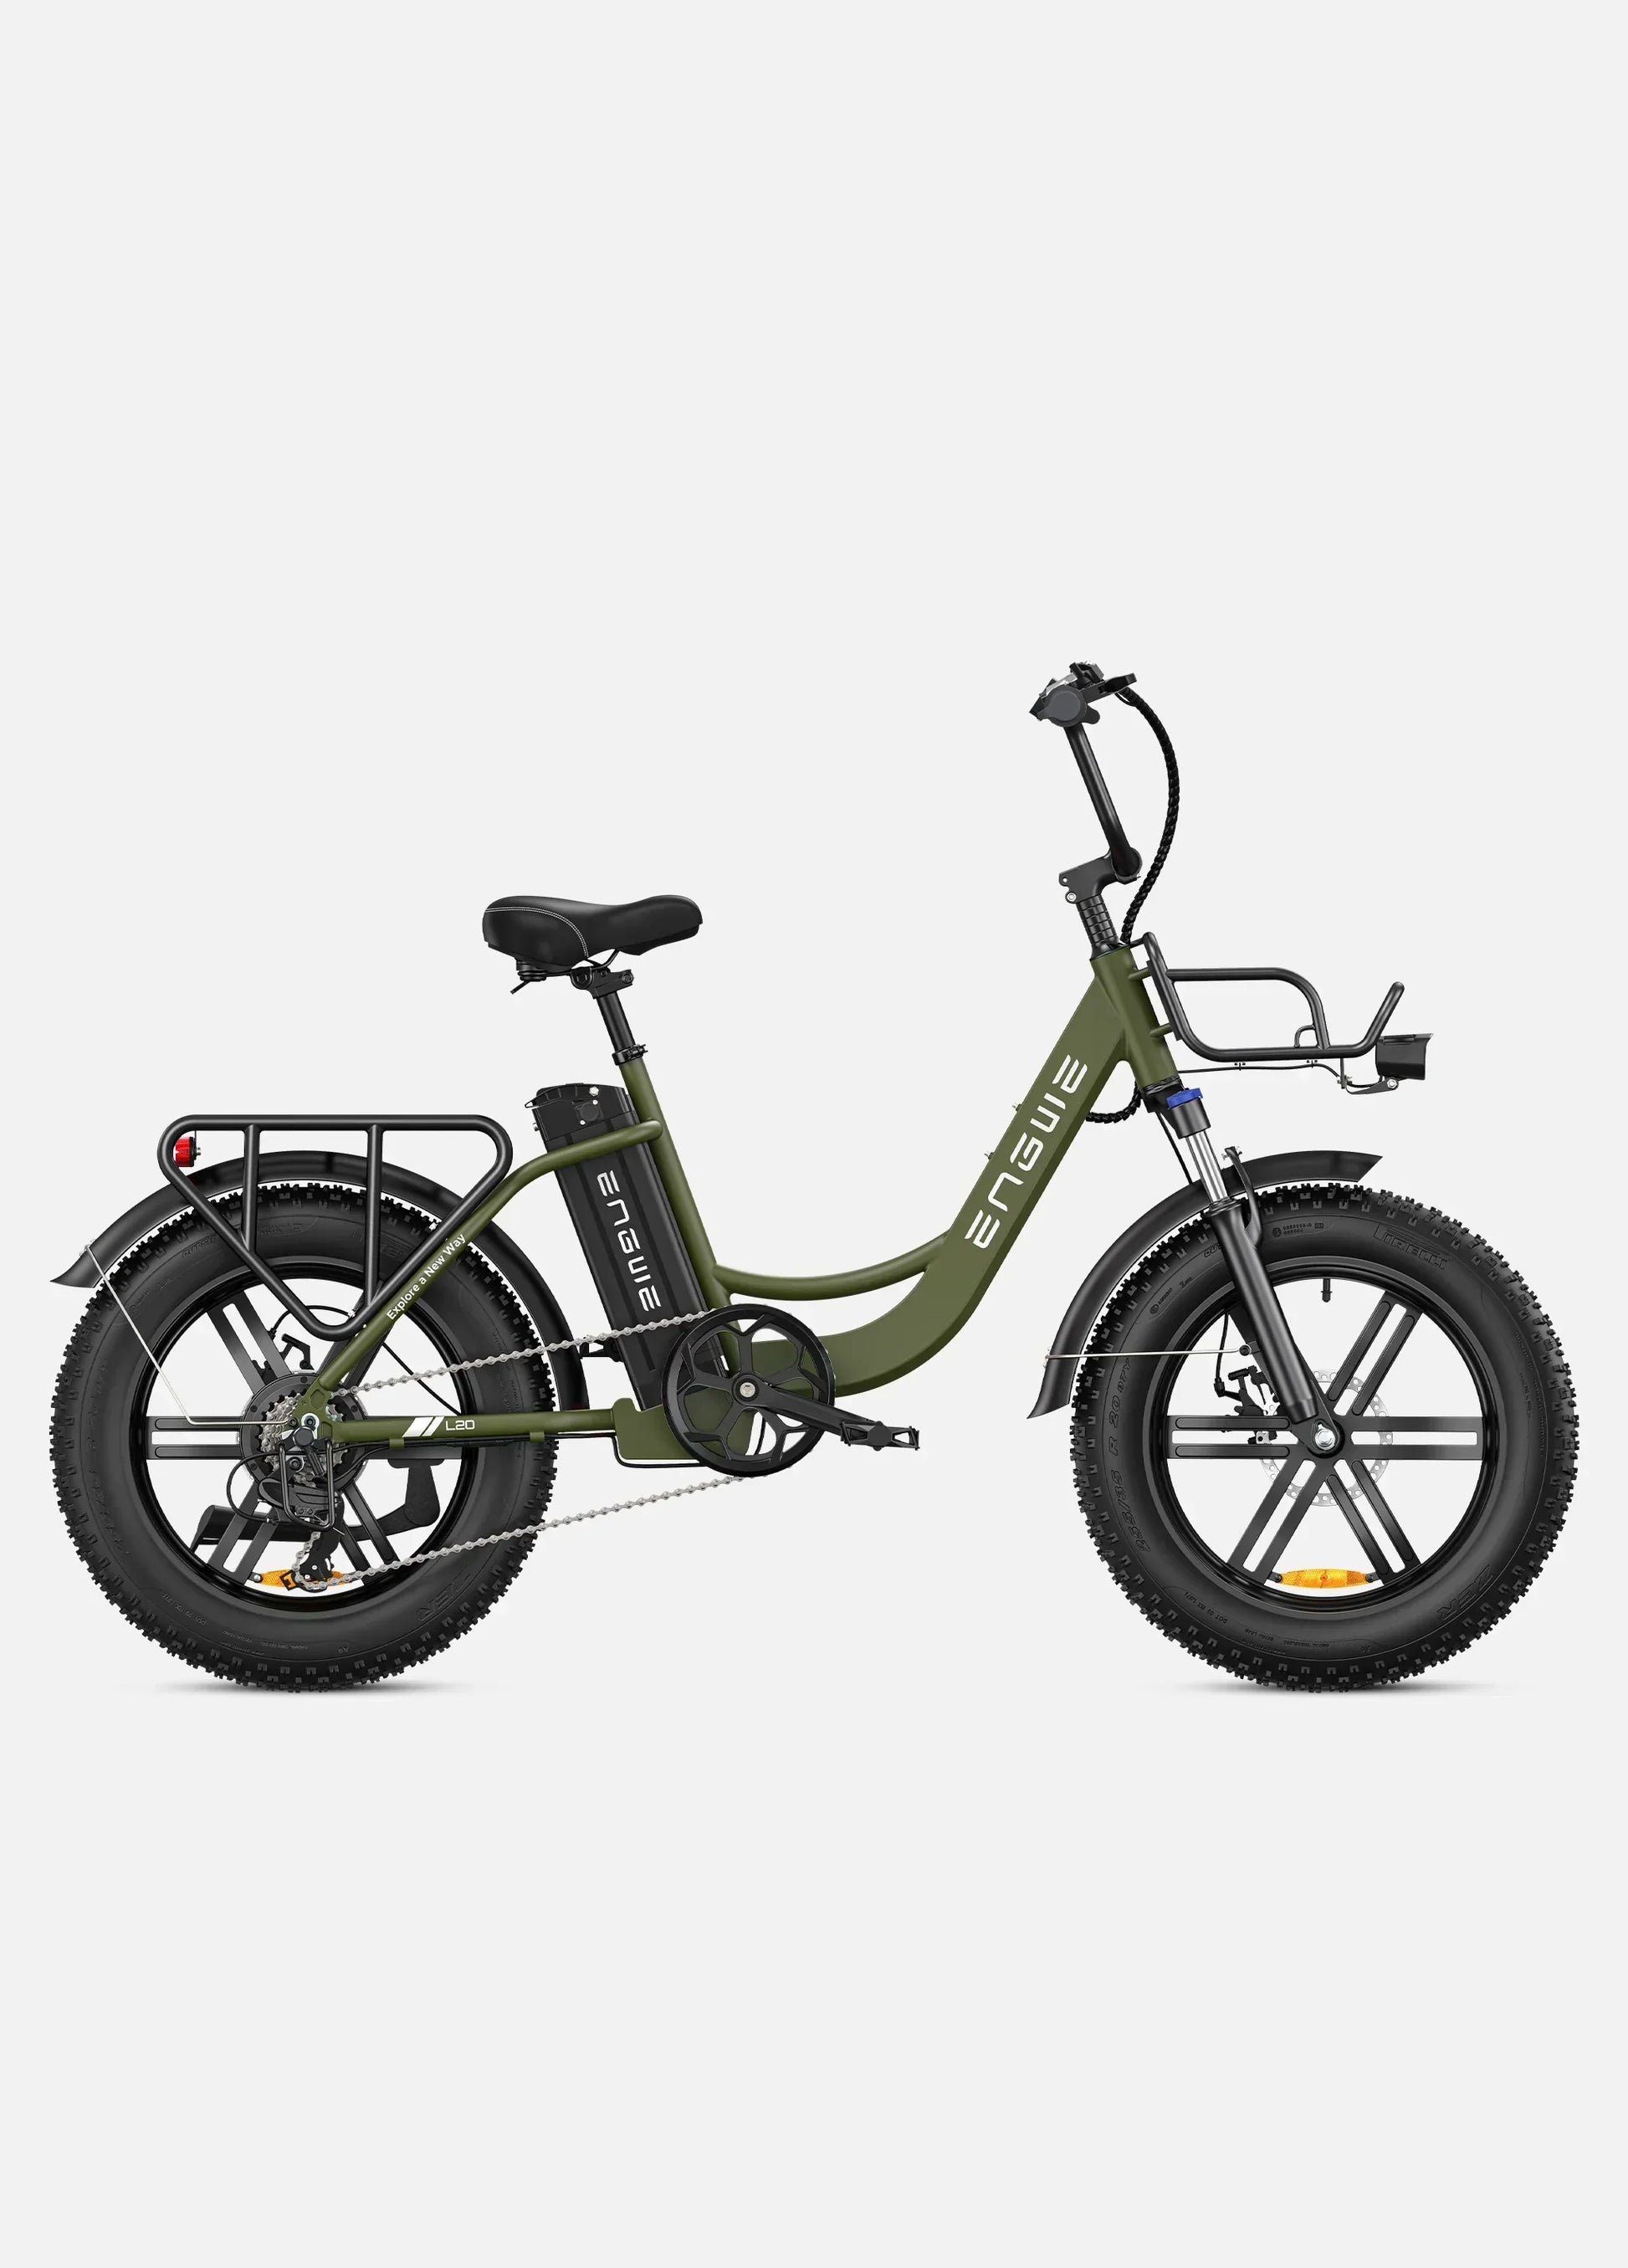 ENGWE L20 Electric Bike - Preorder - Pogo cycles UK -cycle to work scheme available